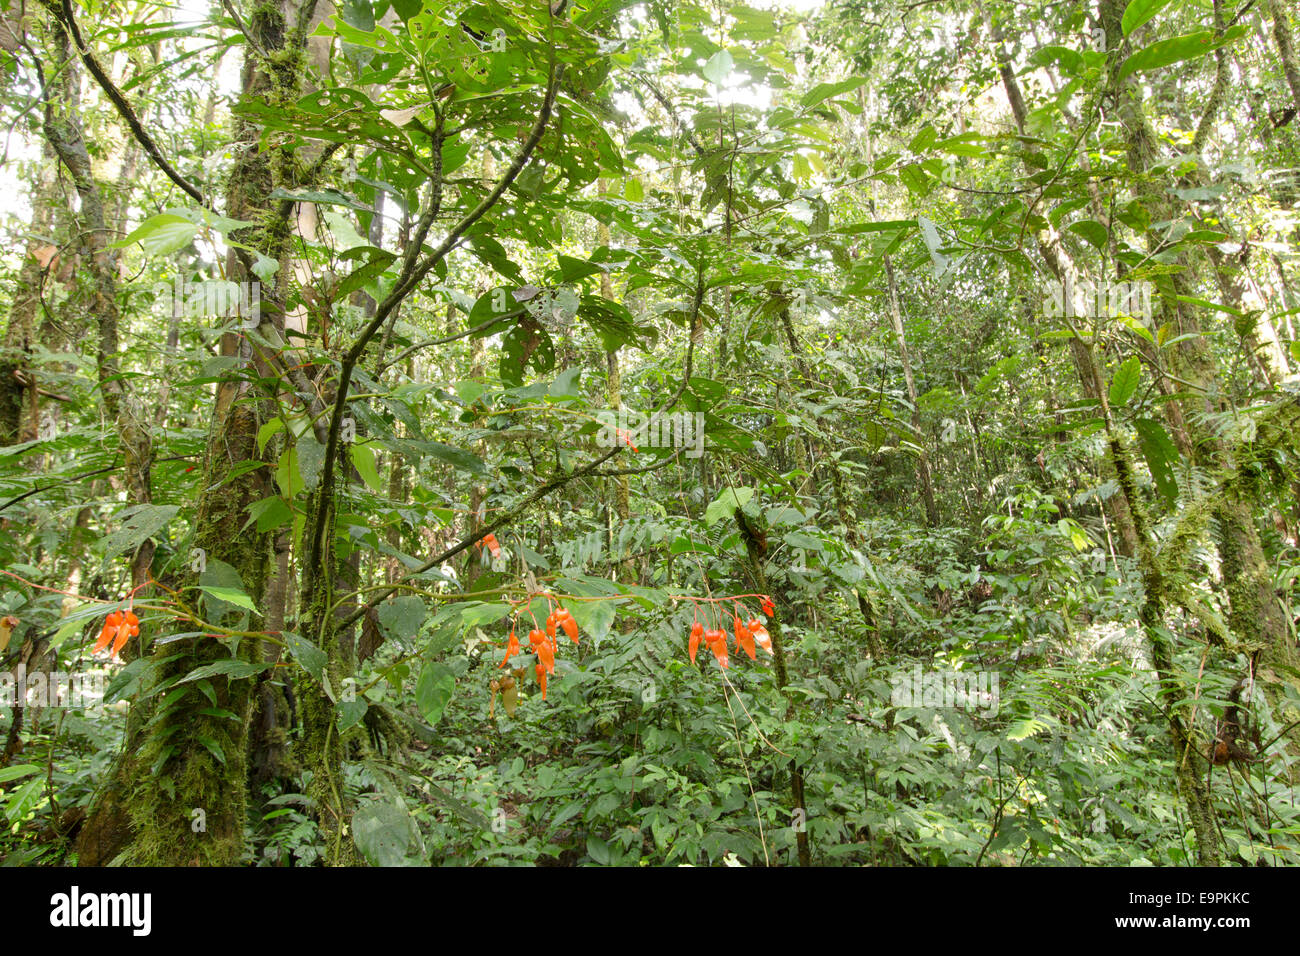 Interior of tropical rainforest in the Ecuadorian Amazon with a flowering Begonia in the foreground Stock Photo